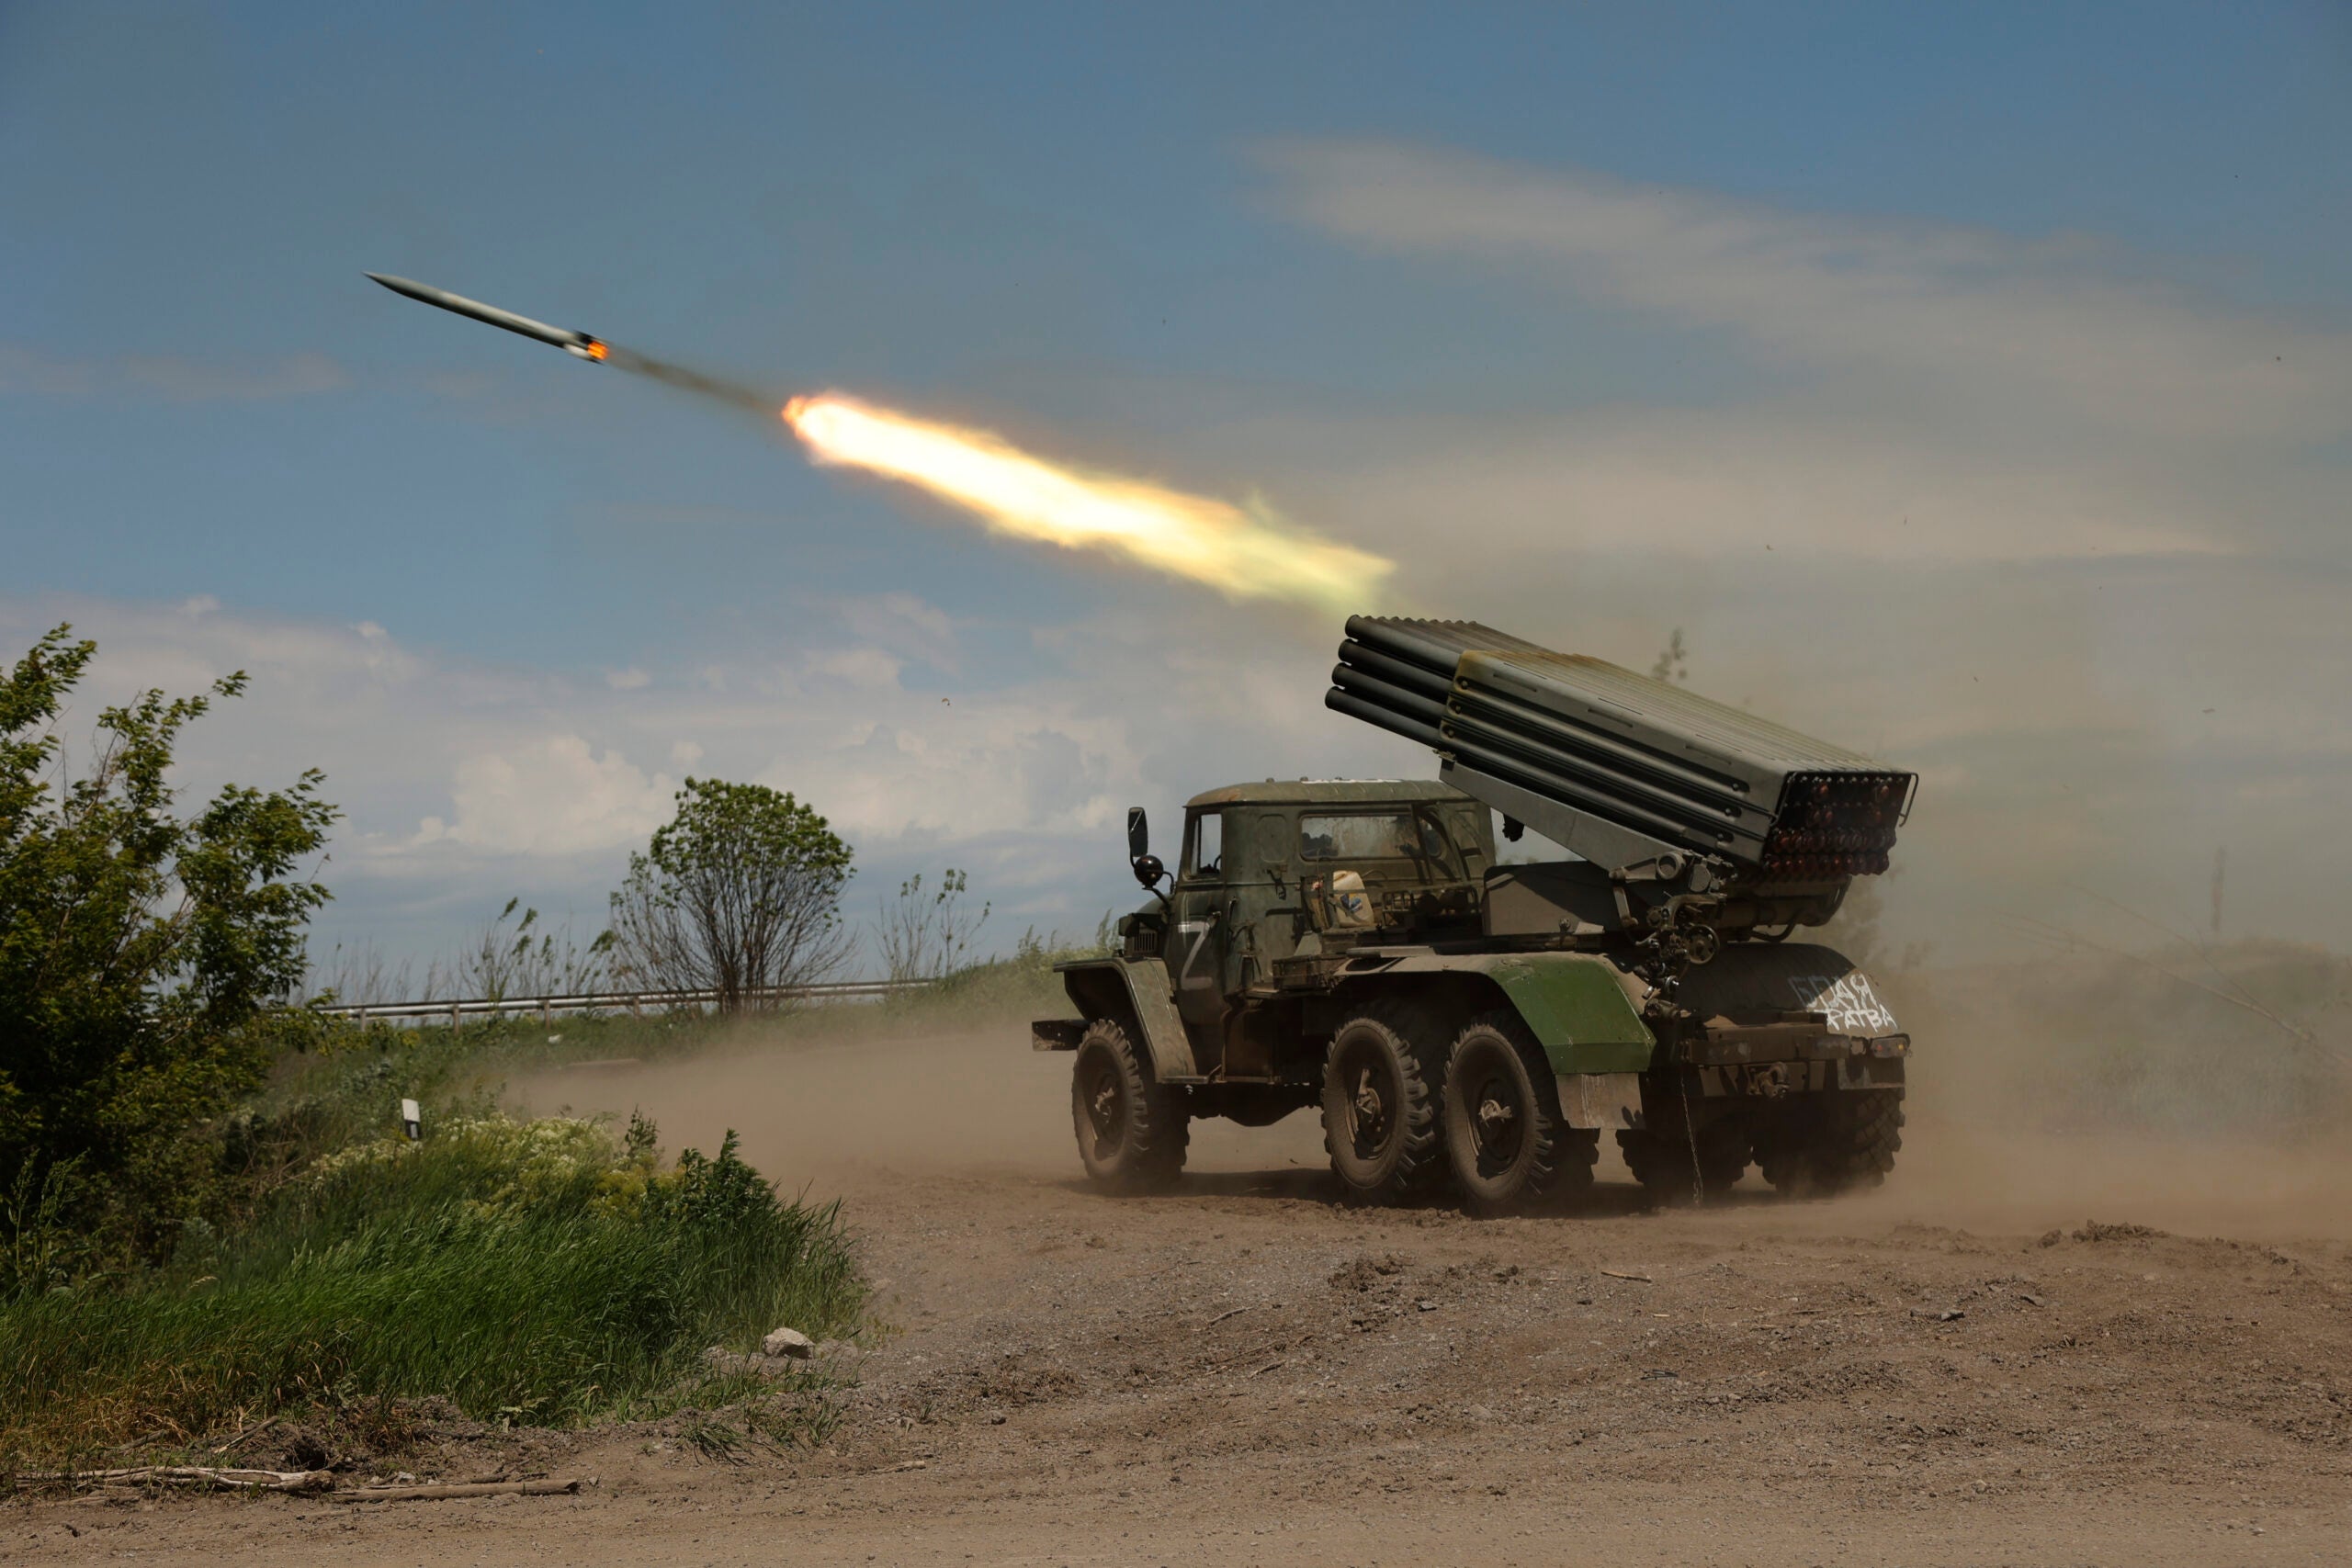 Russia is hammering Ukraine with up to 60,000 artillery shells and rockets every day